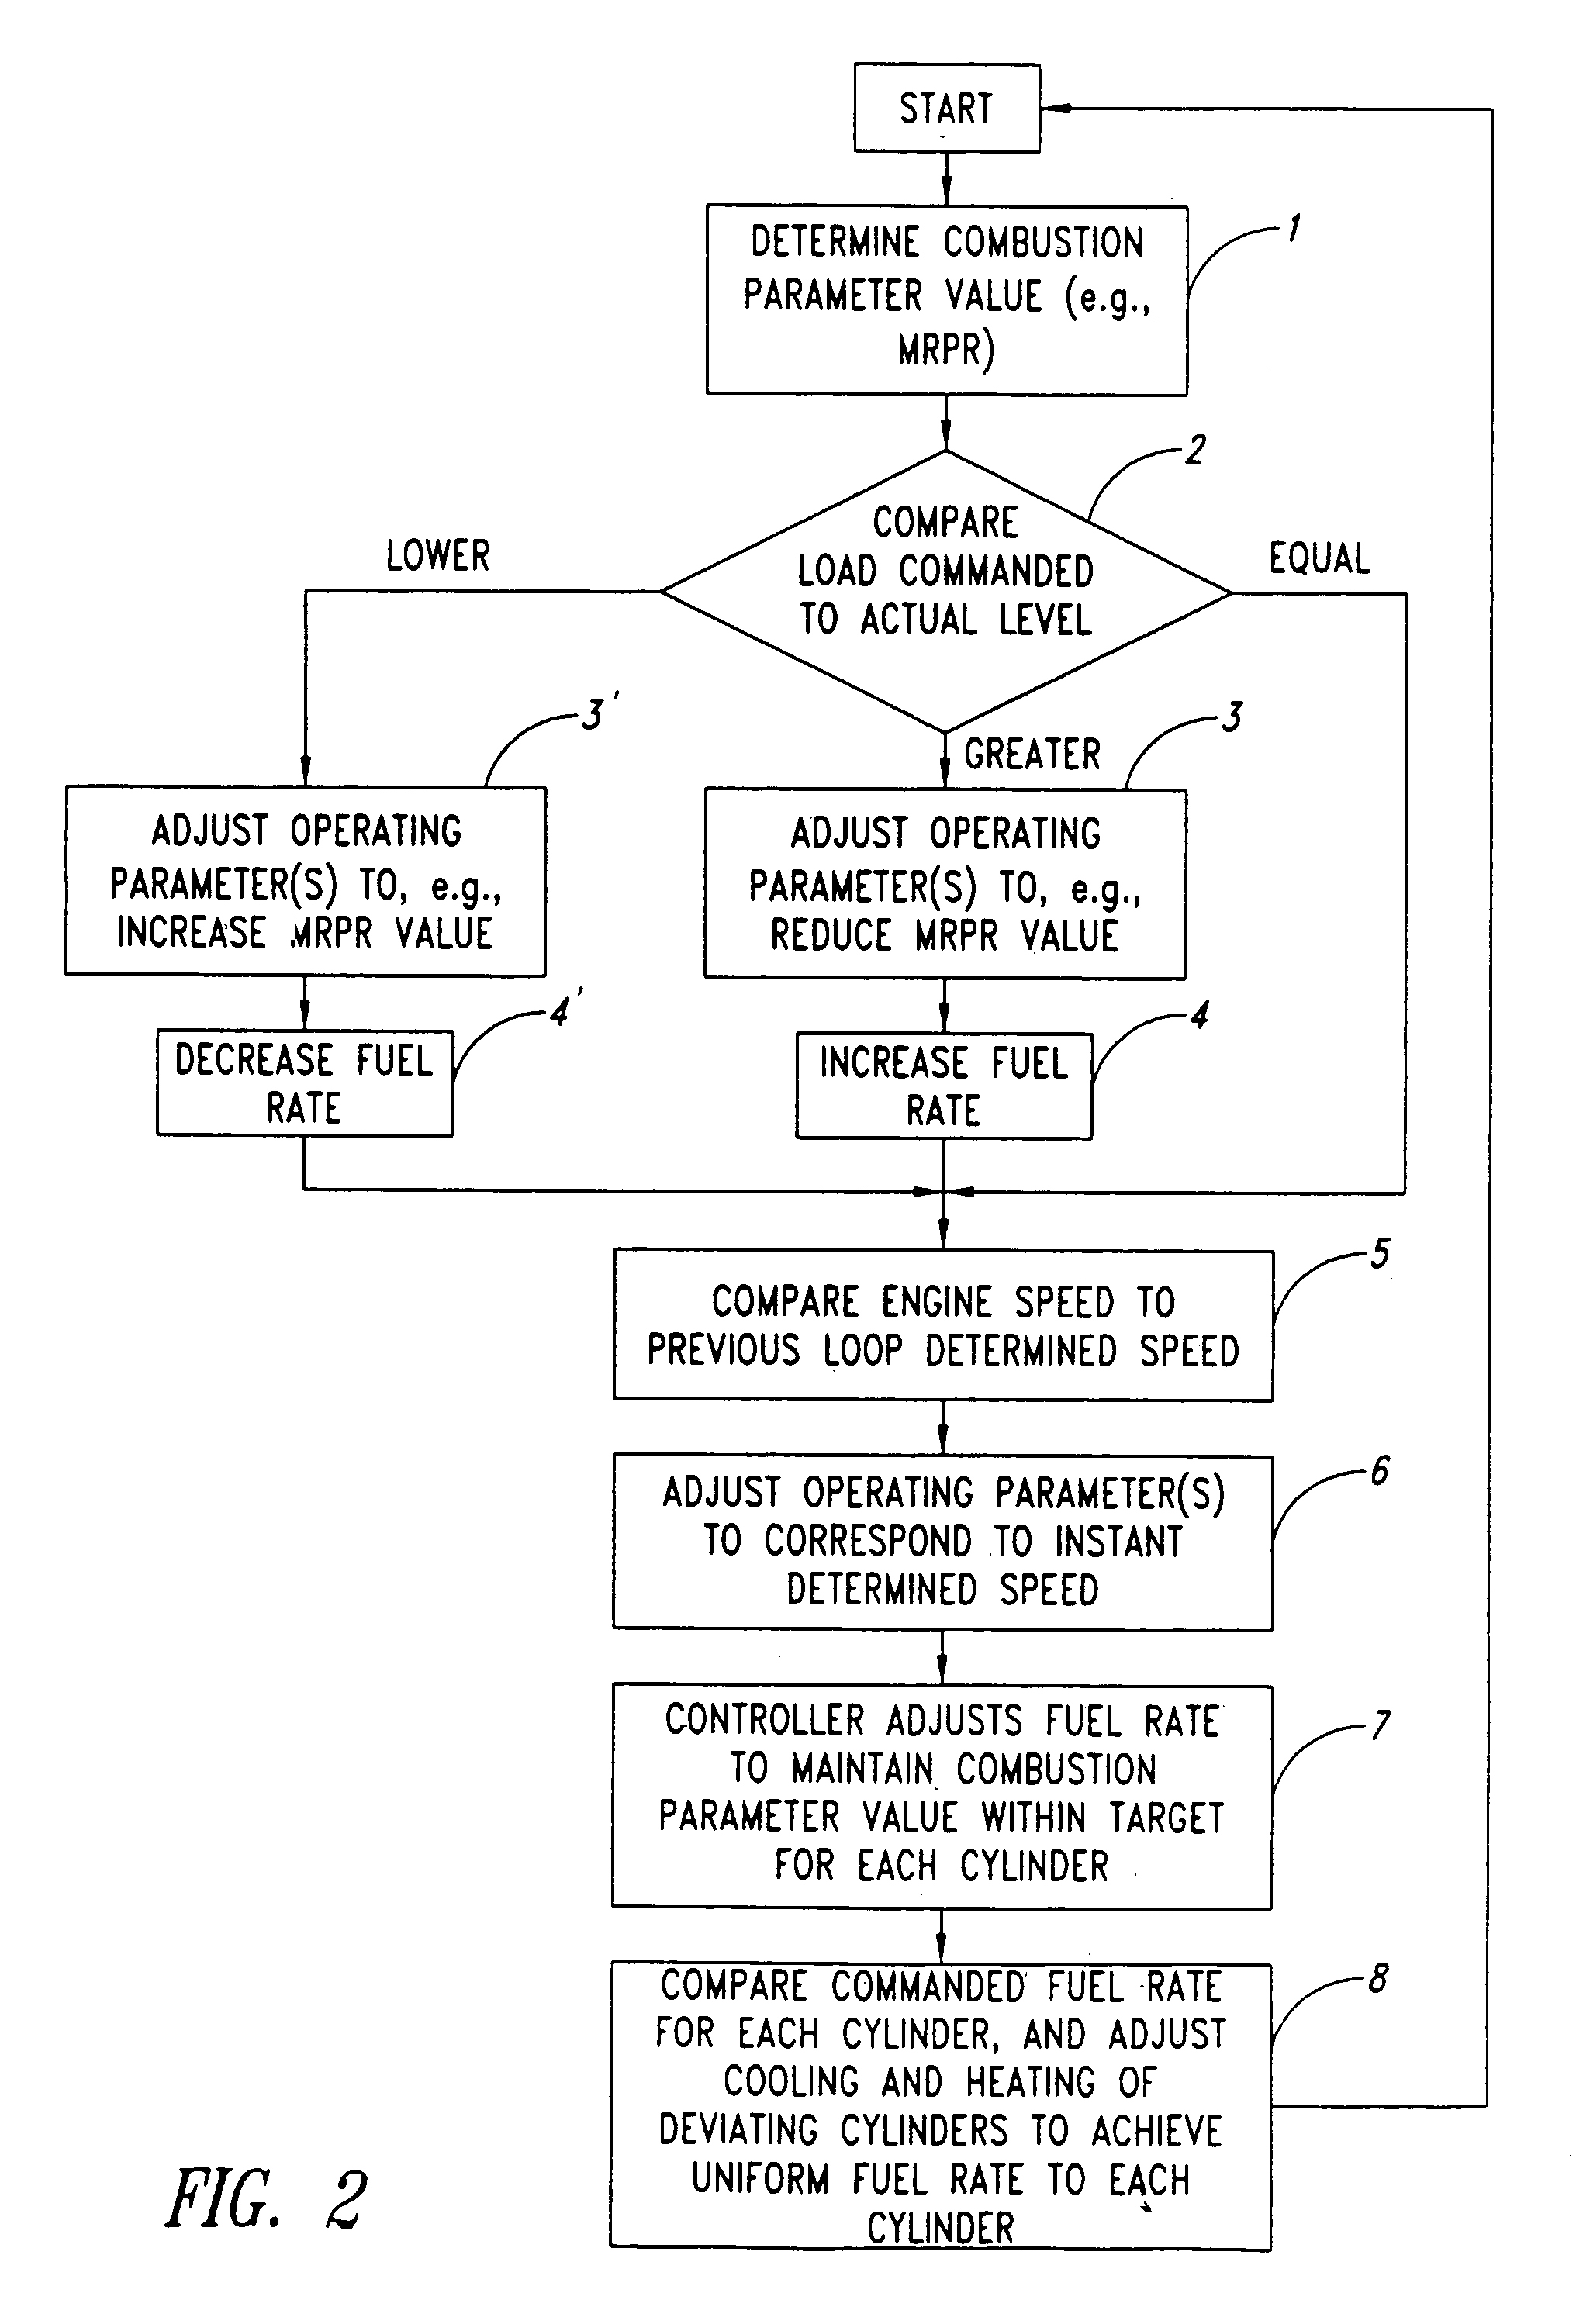 Methods of operation for controlled temperature combustion engines using gasoline-like fuel, particularly multicylinder homogenous charge compression ignition (HCCI) engines